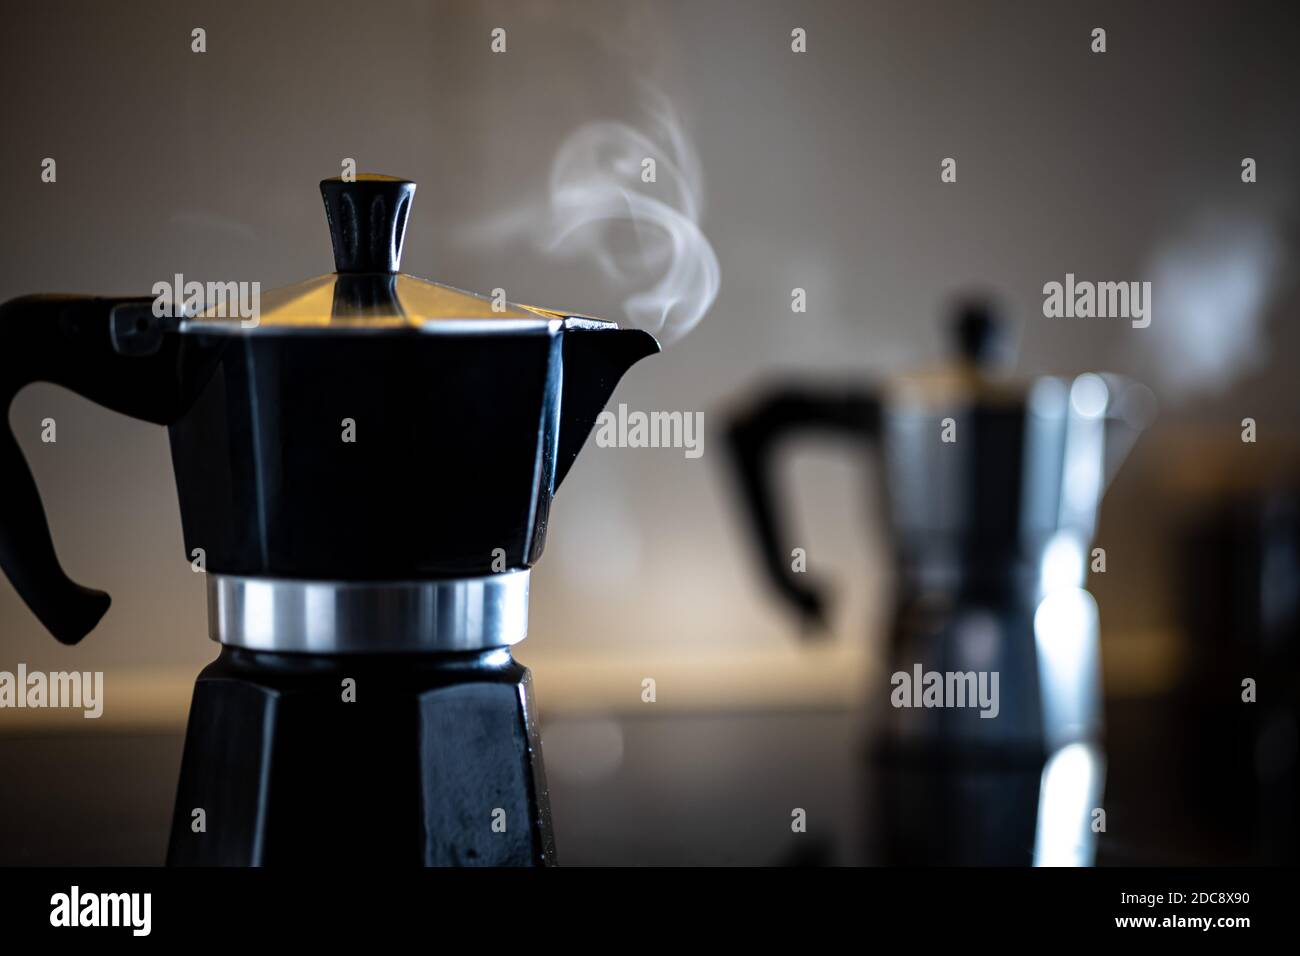 Steam Rising From A Stovetop Espresso Maker Stock Photo - Download Image  Now - Boiling, Burner - Stove Top, Burning - iStock